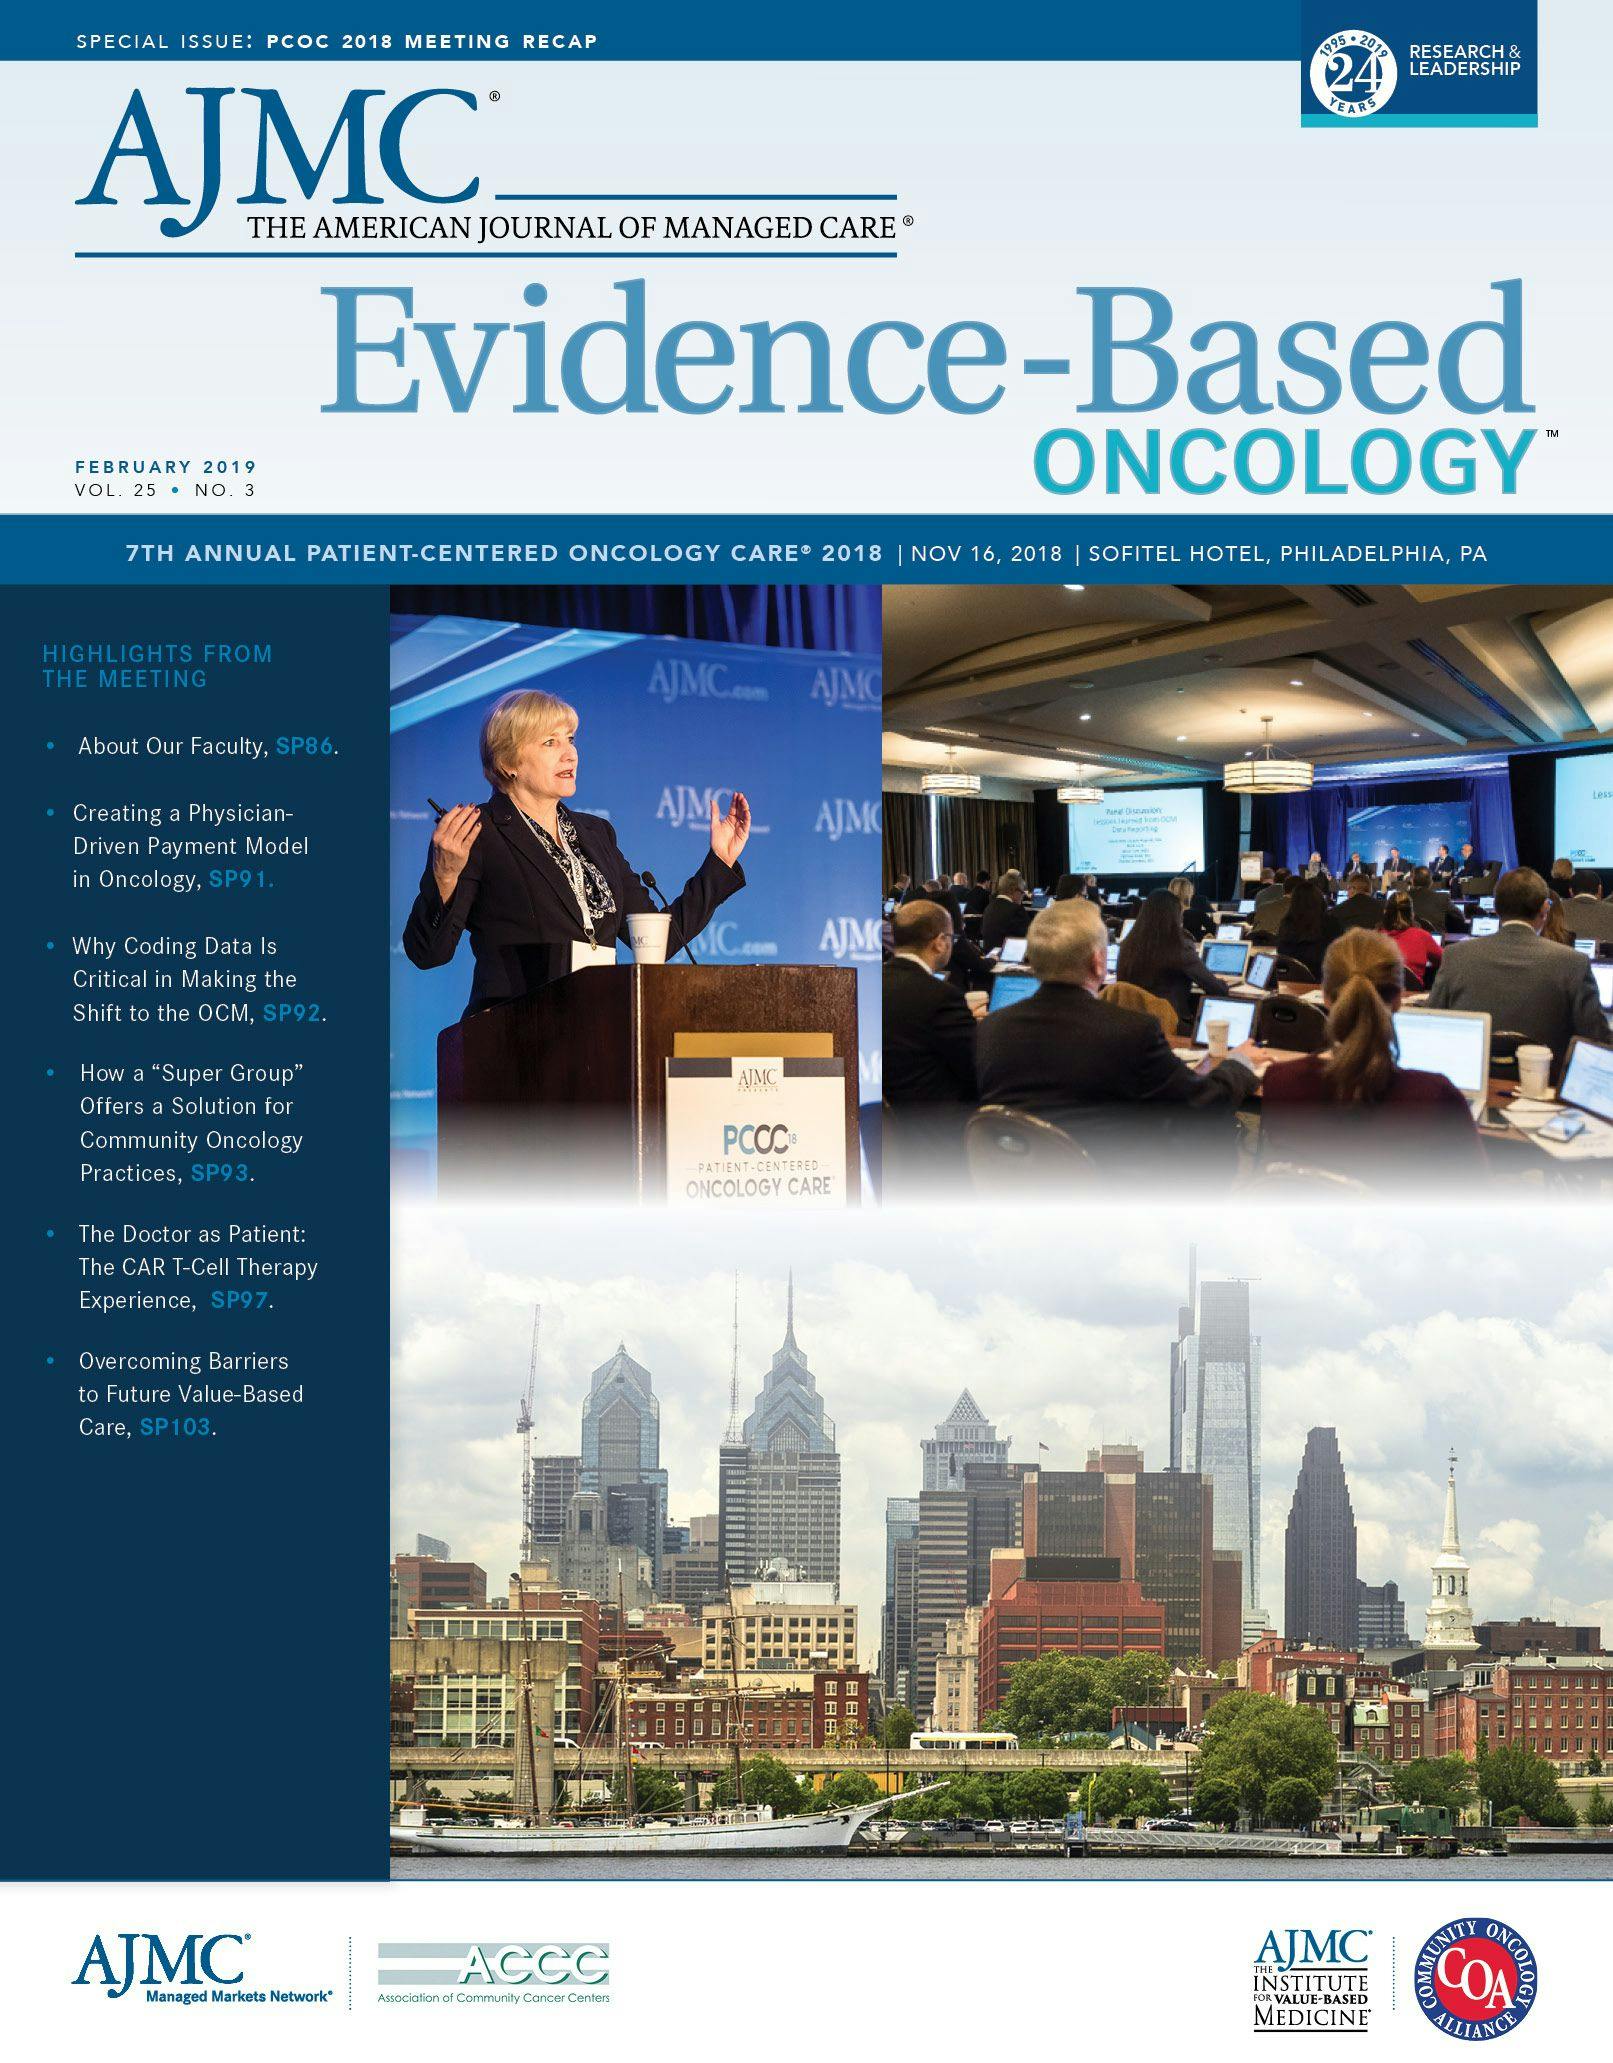 Patient-Centered Oncology Care 2018